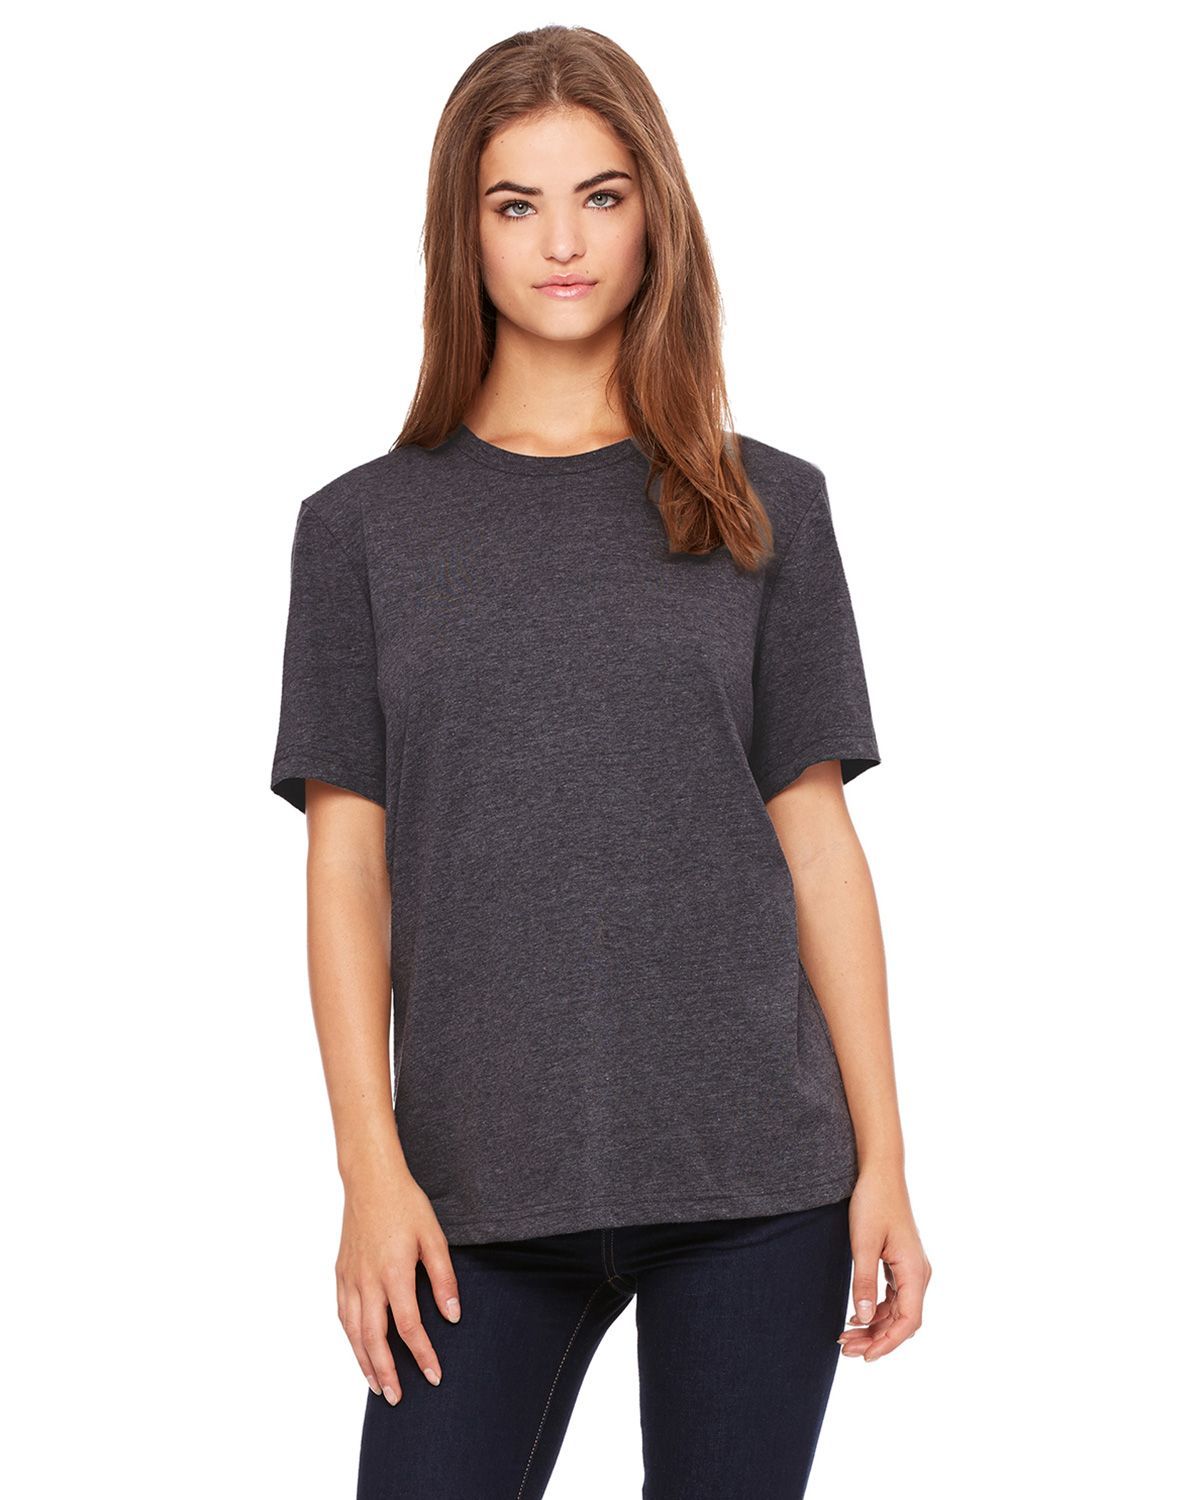 Bella + Canvas B6400 Ladies Missy’s Relaxed Jersey Short-Sleeve T-Shirt ...